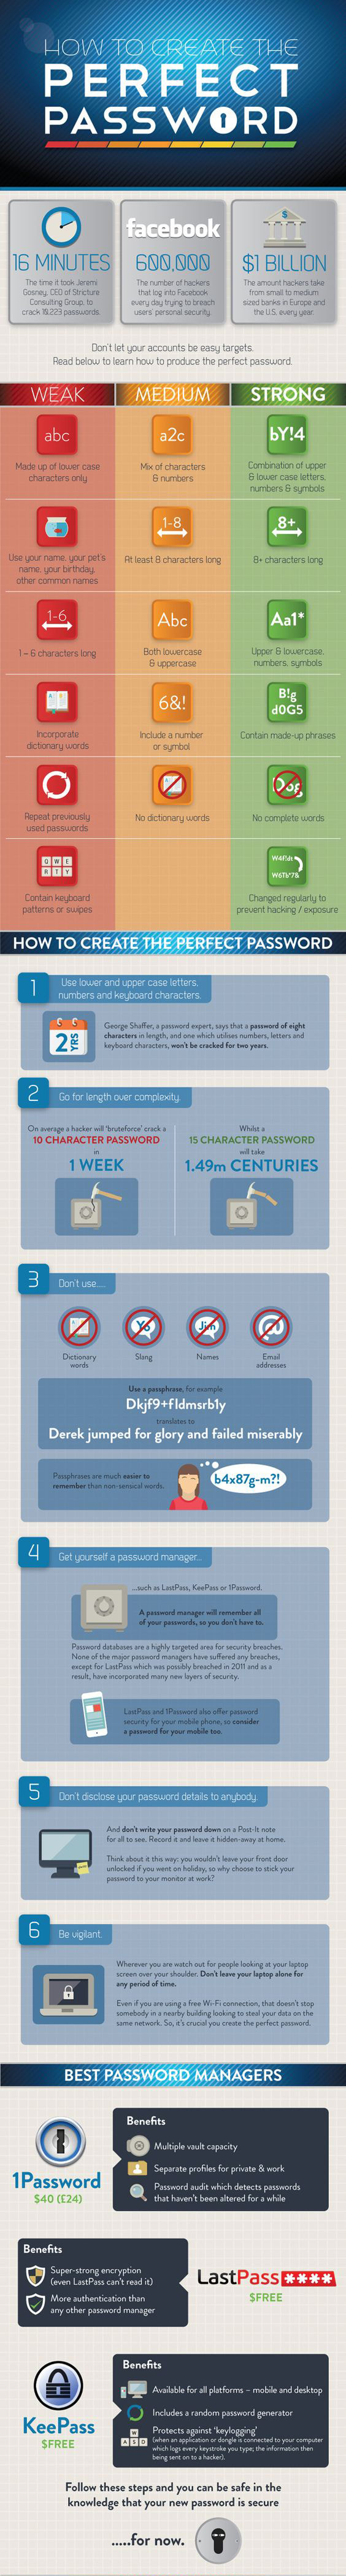 It seems obvious, but passwords are our first line of defense against a growing army of nefarious hackers looking to steal our data, money or even identities. While many people know how serious the issue of cybersecurity is, many still use passwords that are remarkably bad. Compounding matters is the common practice of using the same password across multiple accounts, so a hacker who gains access to one account may be able to breach others. But protecting yourself is easy and there’s just no excuse for leaving your accounts vulnerable with bad passwords.  With more and more of us shifting everyday tasks--banking, education, social interaction, even shopping for groceries--to the virtual world, securing our personal information has become more important than ever. One of the simplest ways to help protect our financial and other info from prying eyes and would-be identity thieves is to use a strong password. Yet many people take a decidedly casual approach to choosing a password, with potential disastrous results.  Much of the advice in the graphic might seem like common sense, but the frequency with which password-related breaches occur tells us that’s not the case. There are also some interesting things in there that you might not know, however. For example, the length of your password is incredibly important -- a hacker can use a “bruteforce” attack to guess a 10-character password in about 1 week, while a 15-character password will take almost 1.5 million centuries to crack.  Do yourself a favor and look through the infographic below for helpful hints on how to protect yourself online. 